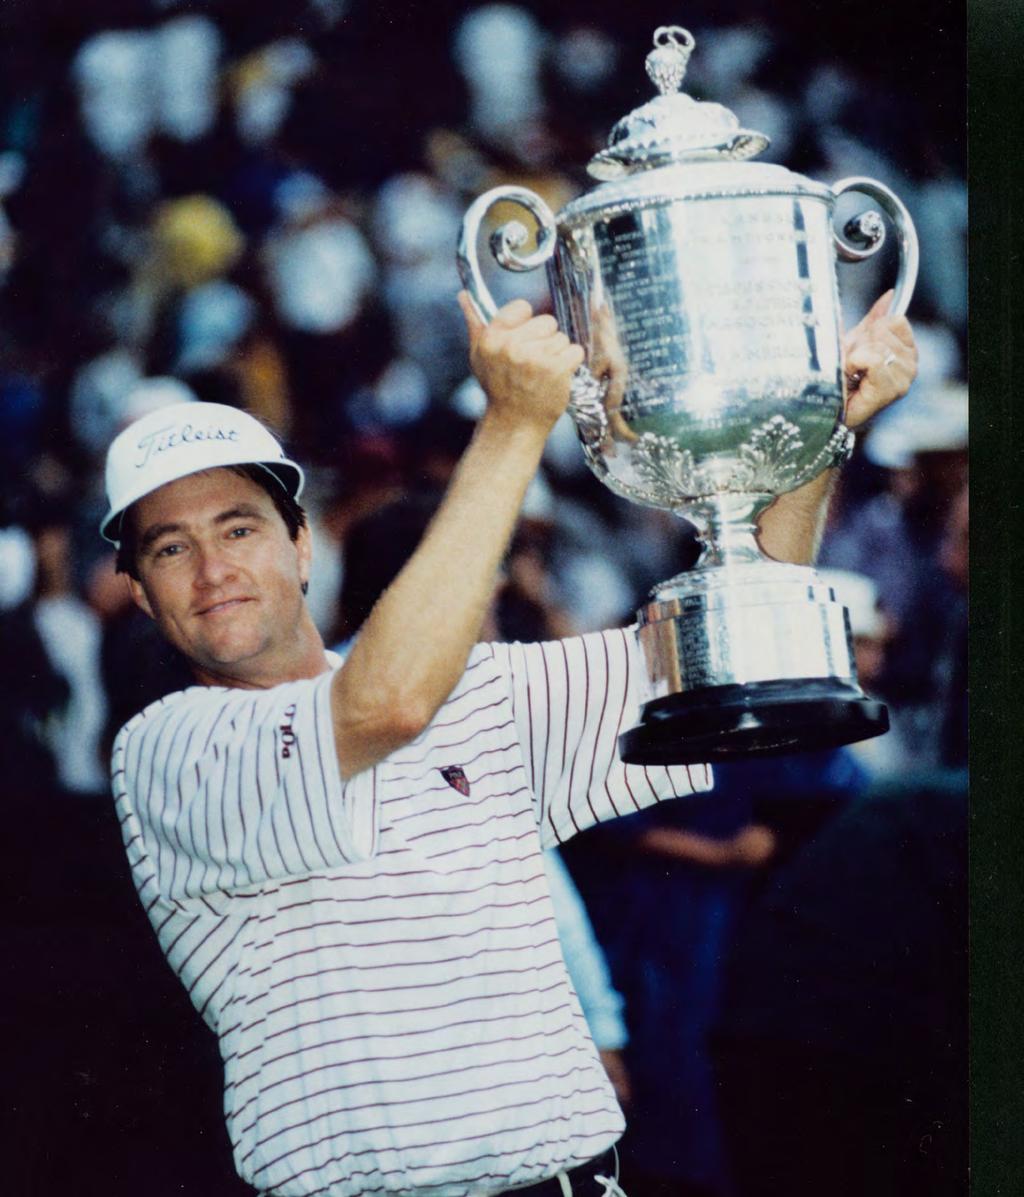 NORTH CAROLINA PGA Tour Highlights United States Ryder Cup captain in 2012 and 2016 Has won 21 PGA Tour events including the 1997 PGA Championship, the 1992 and 2000 PLAYERS, 2001 and 2003 AT&T